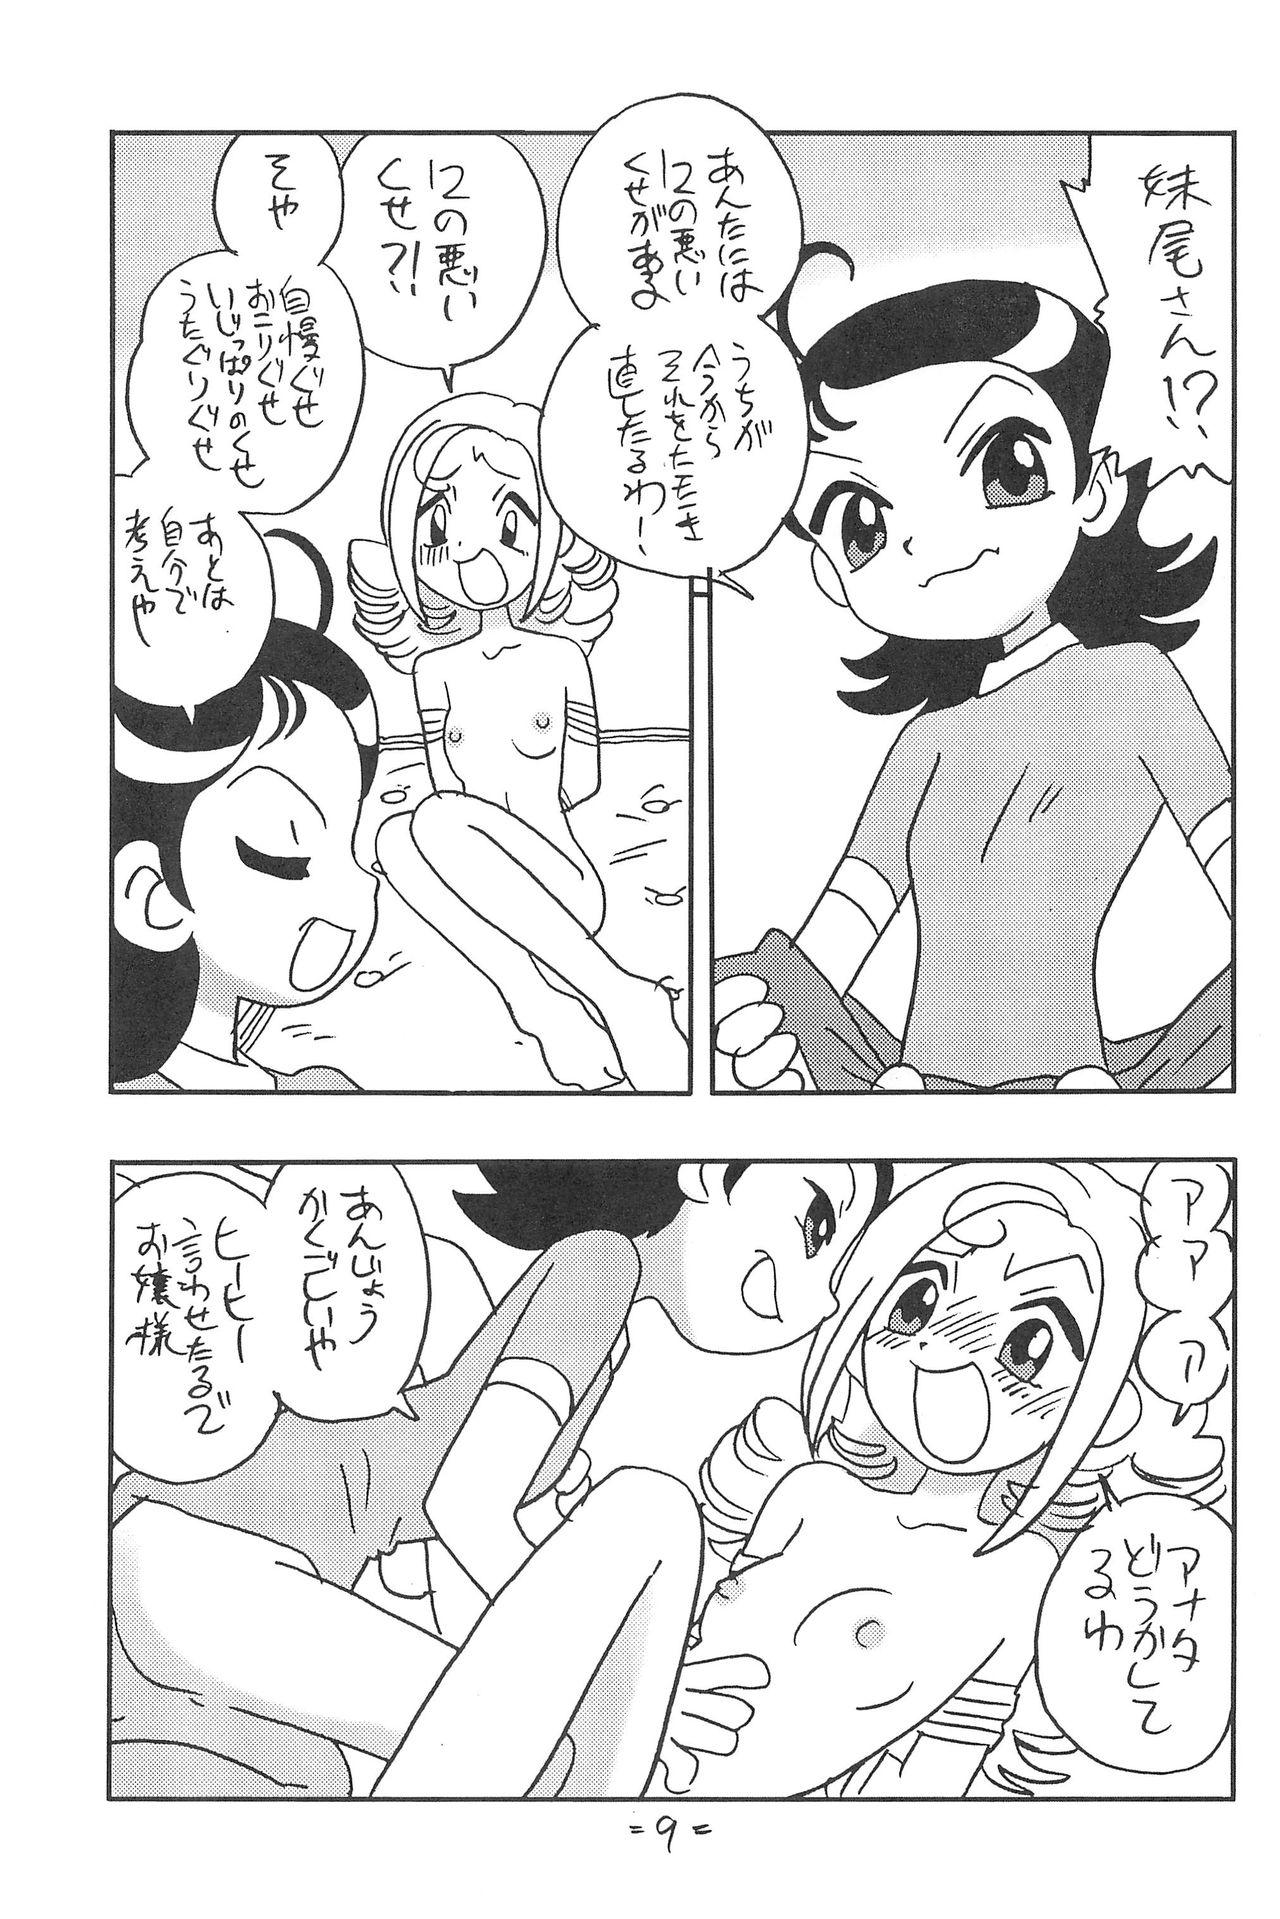 Gaycum Forehead, go ahead! - Ojamajo doremi Belly - Page 9